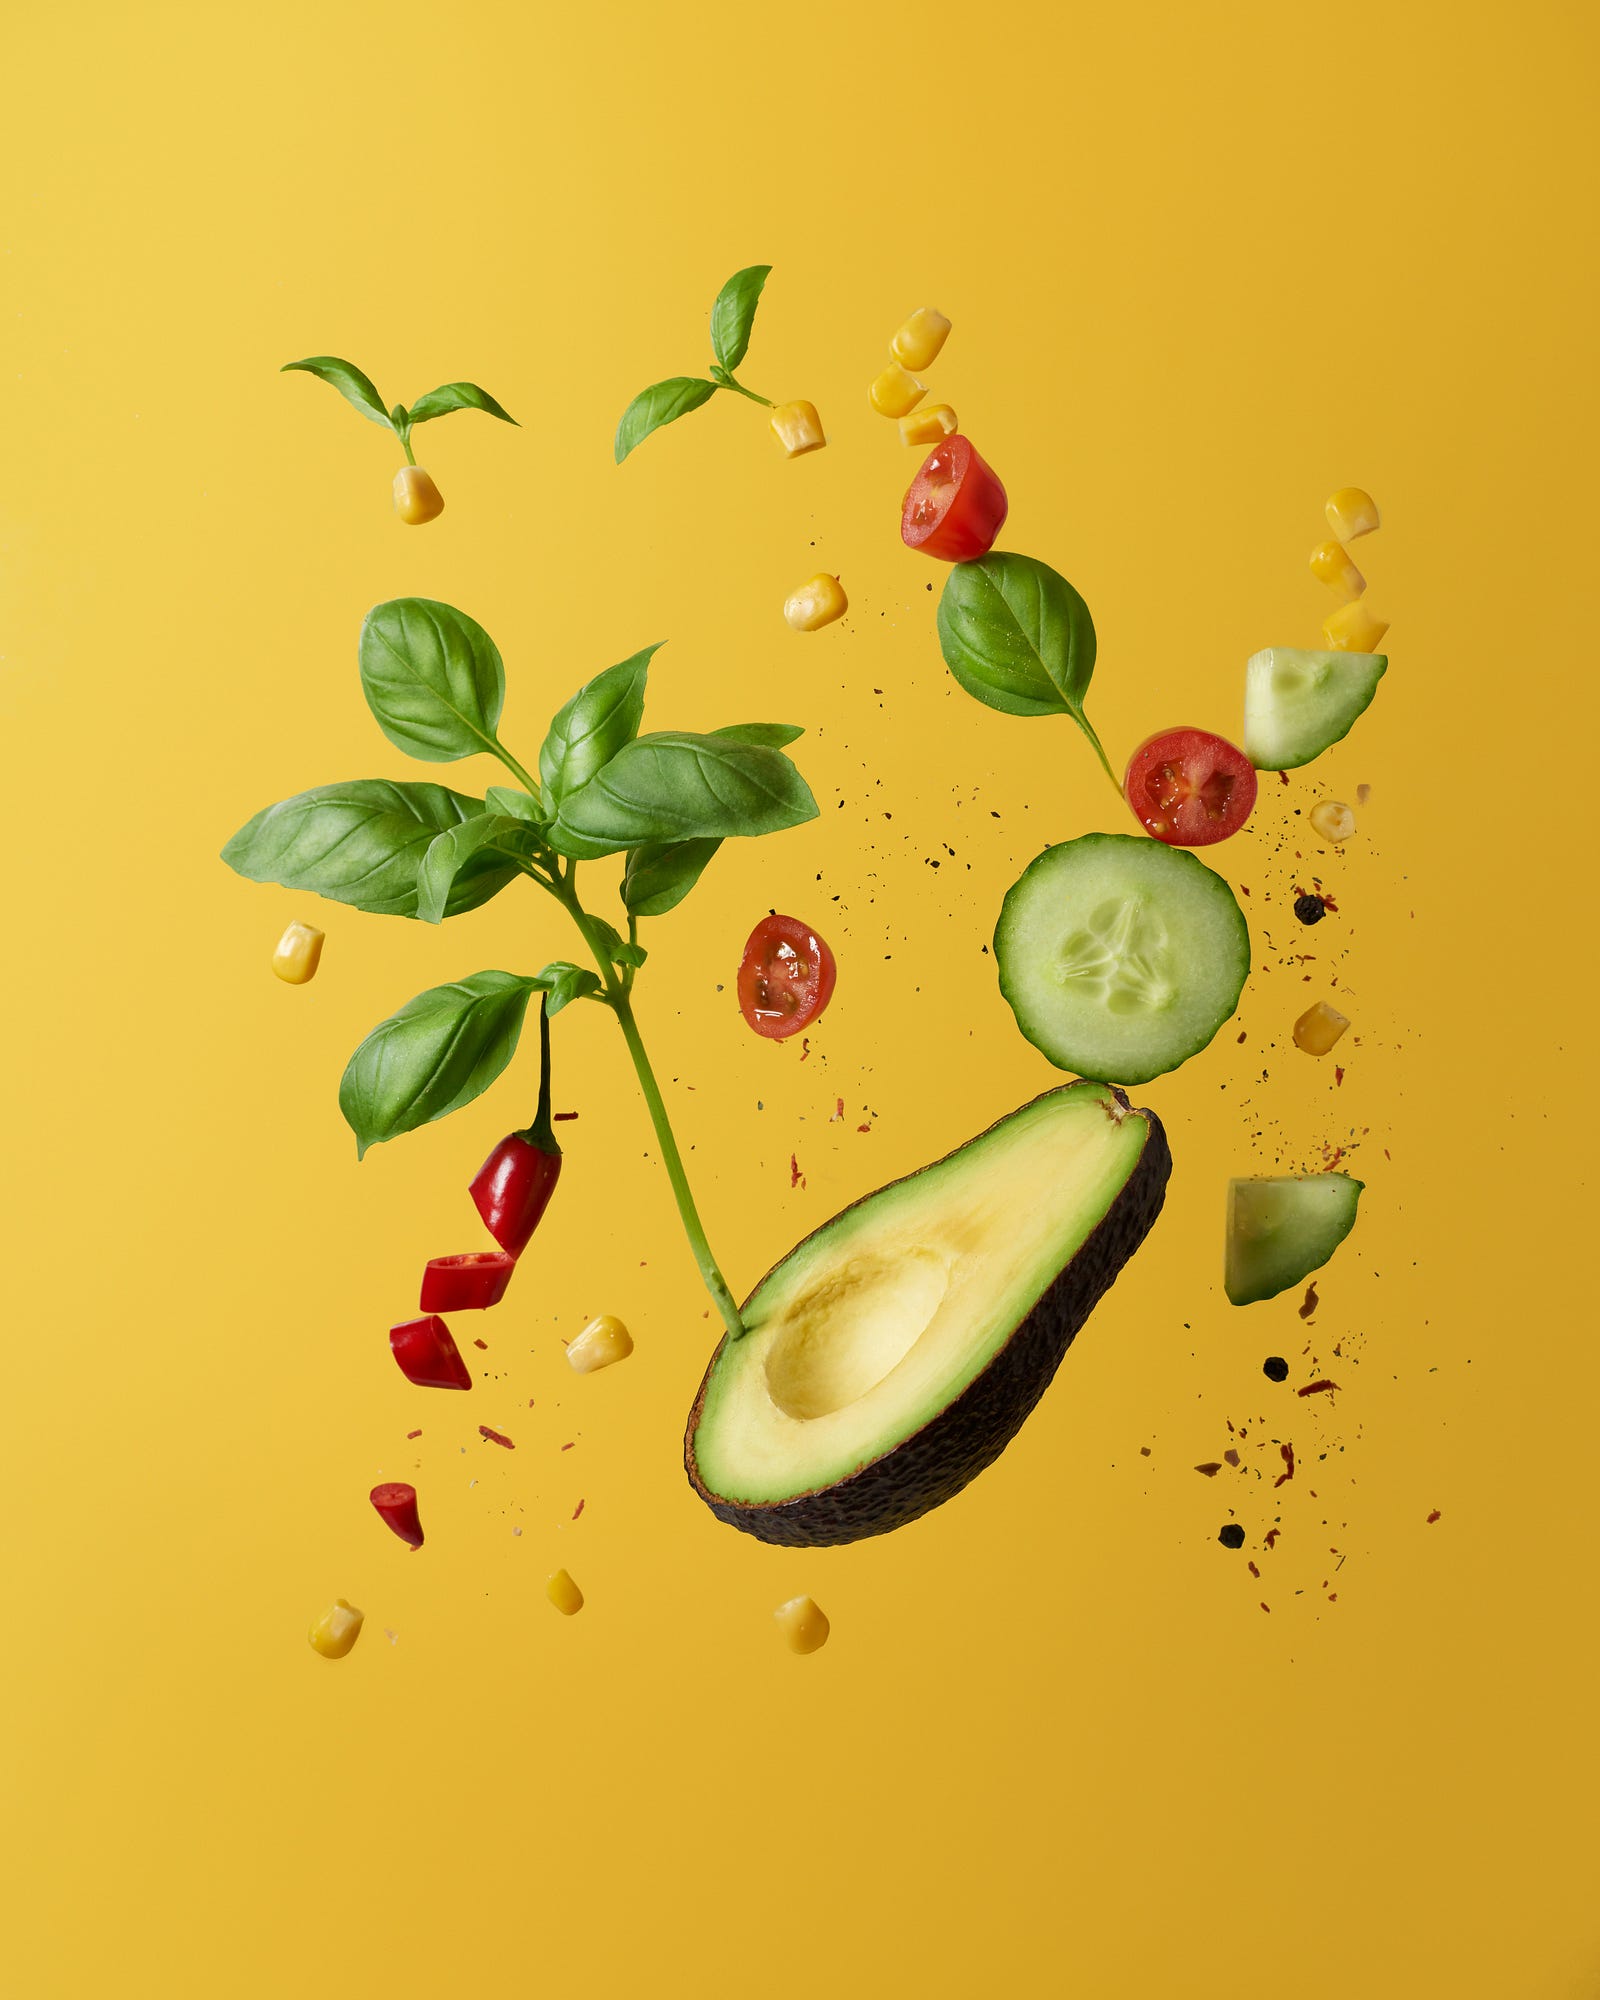 Avocado slices, corn, cucumber slices, and tomato pieces fly into the air.